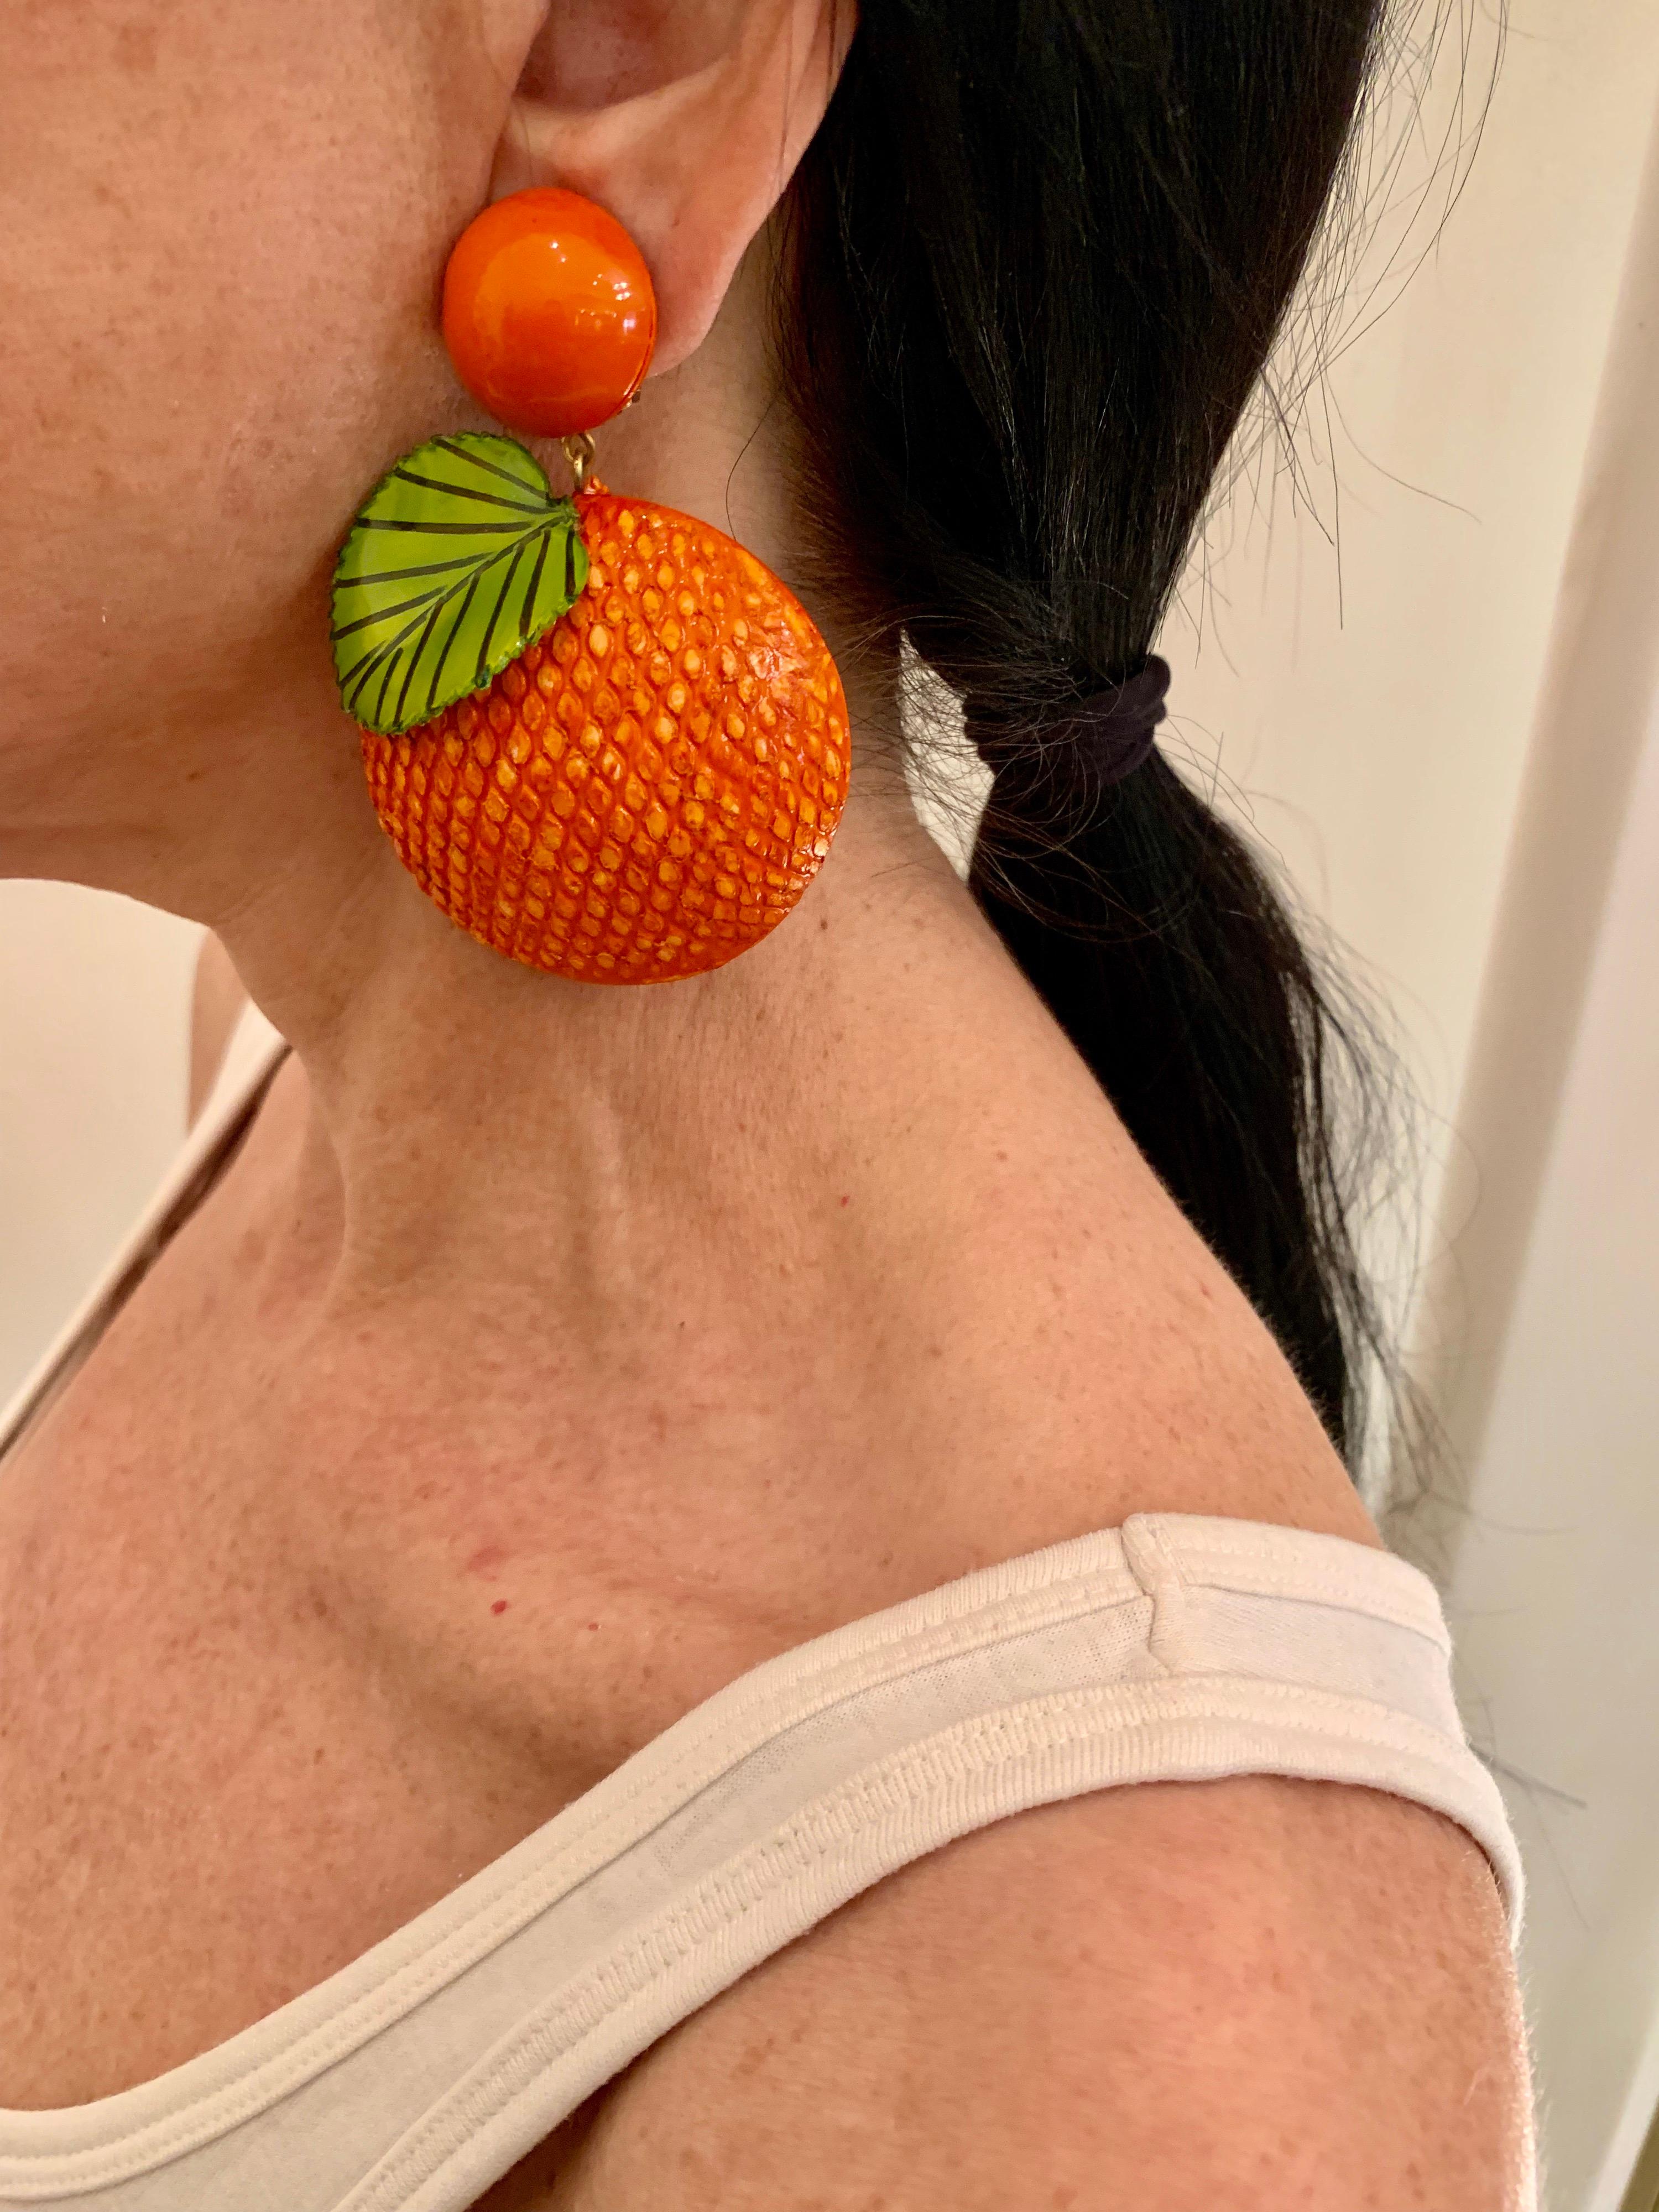 Light and easy to wear, these contemporary handmade artisanal clip-on statement earrings were made in Paris by Cilea. The lightweight earrings feature giant oranges, comprised out of enamel and resin. The orange has a three-dimensional hand